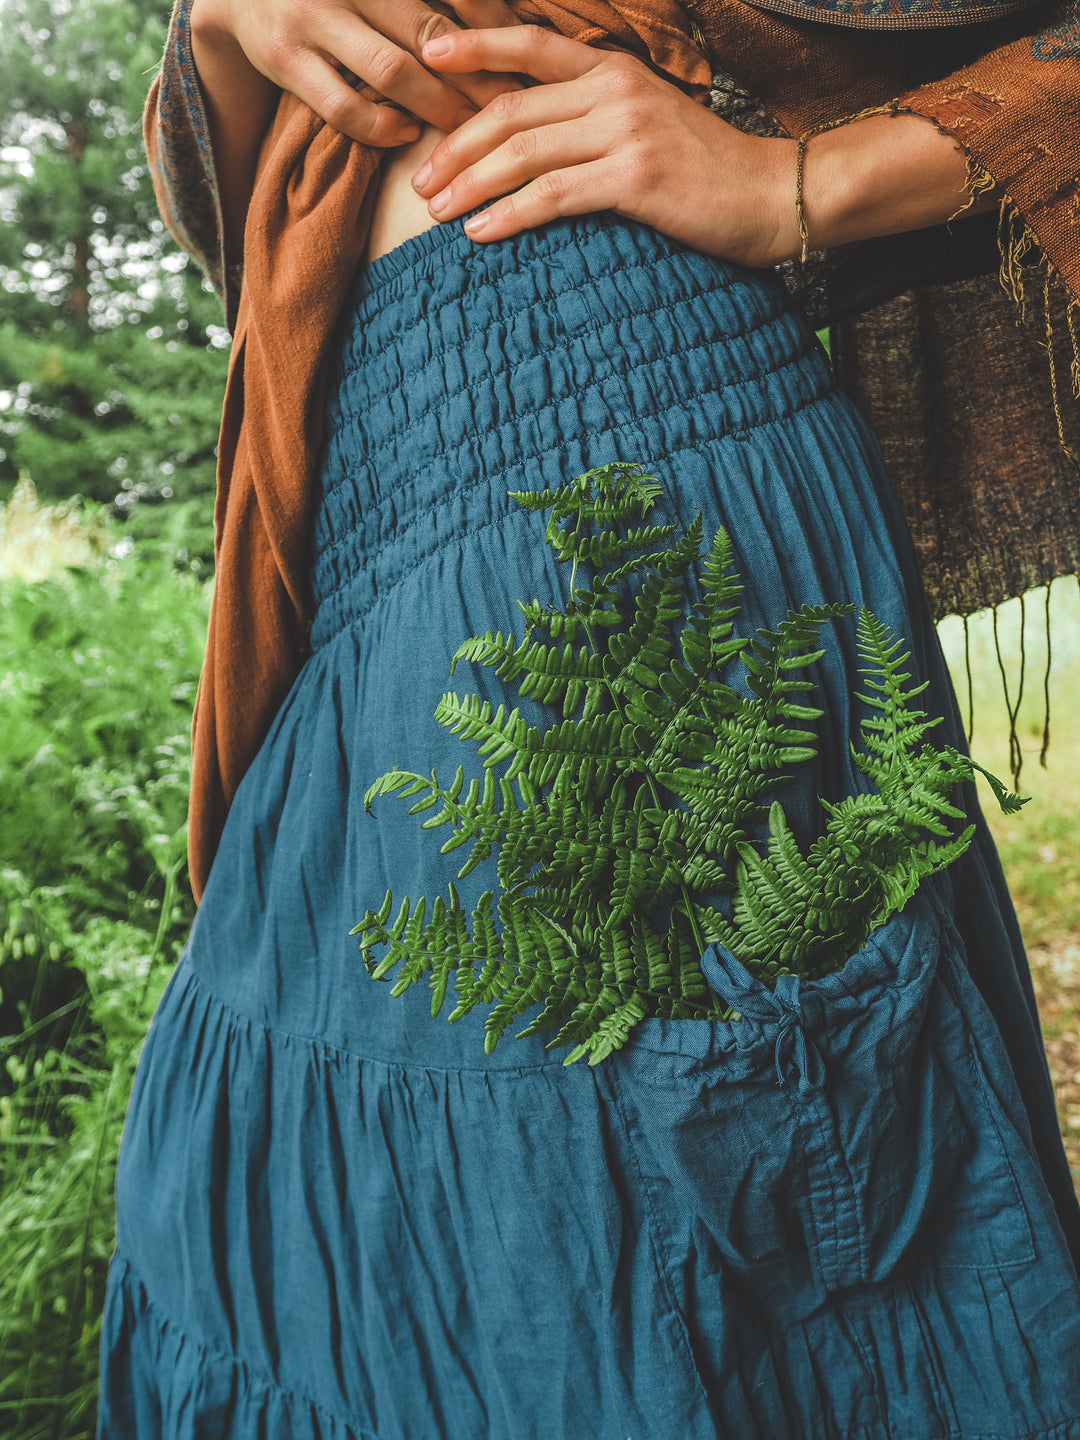 Long blue skirt made from crinkle cotton with large pocket holding greenery.